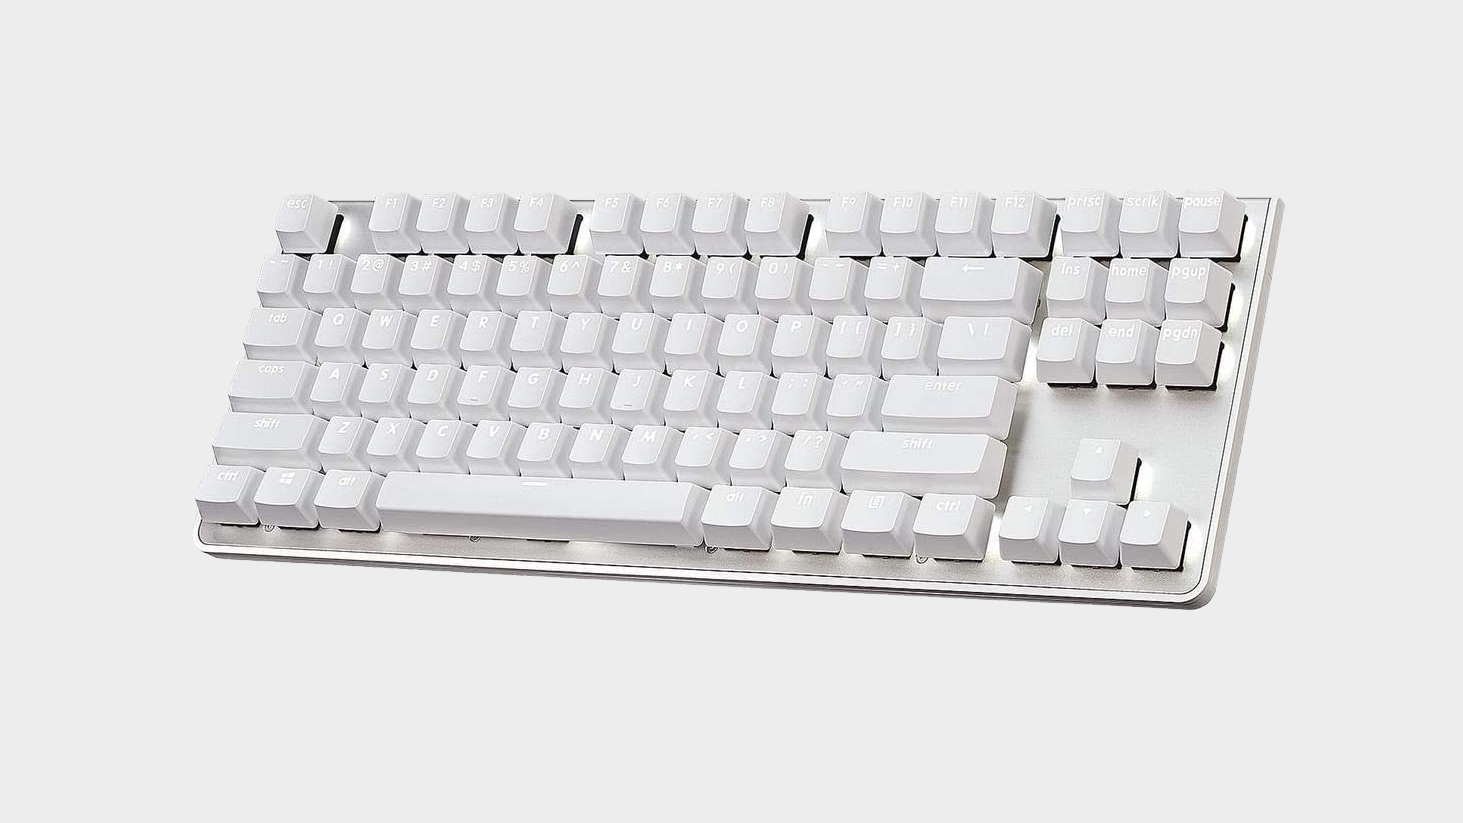 Image of the White G.Skill KM360 gaming keyboard on grey background.